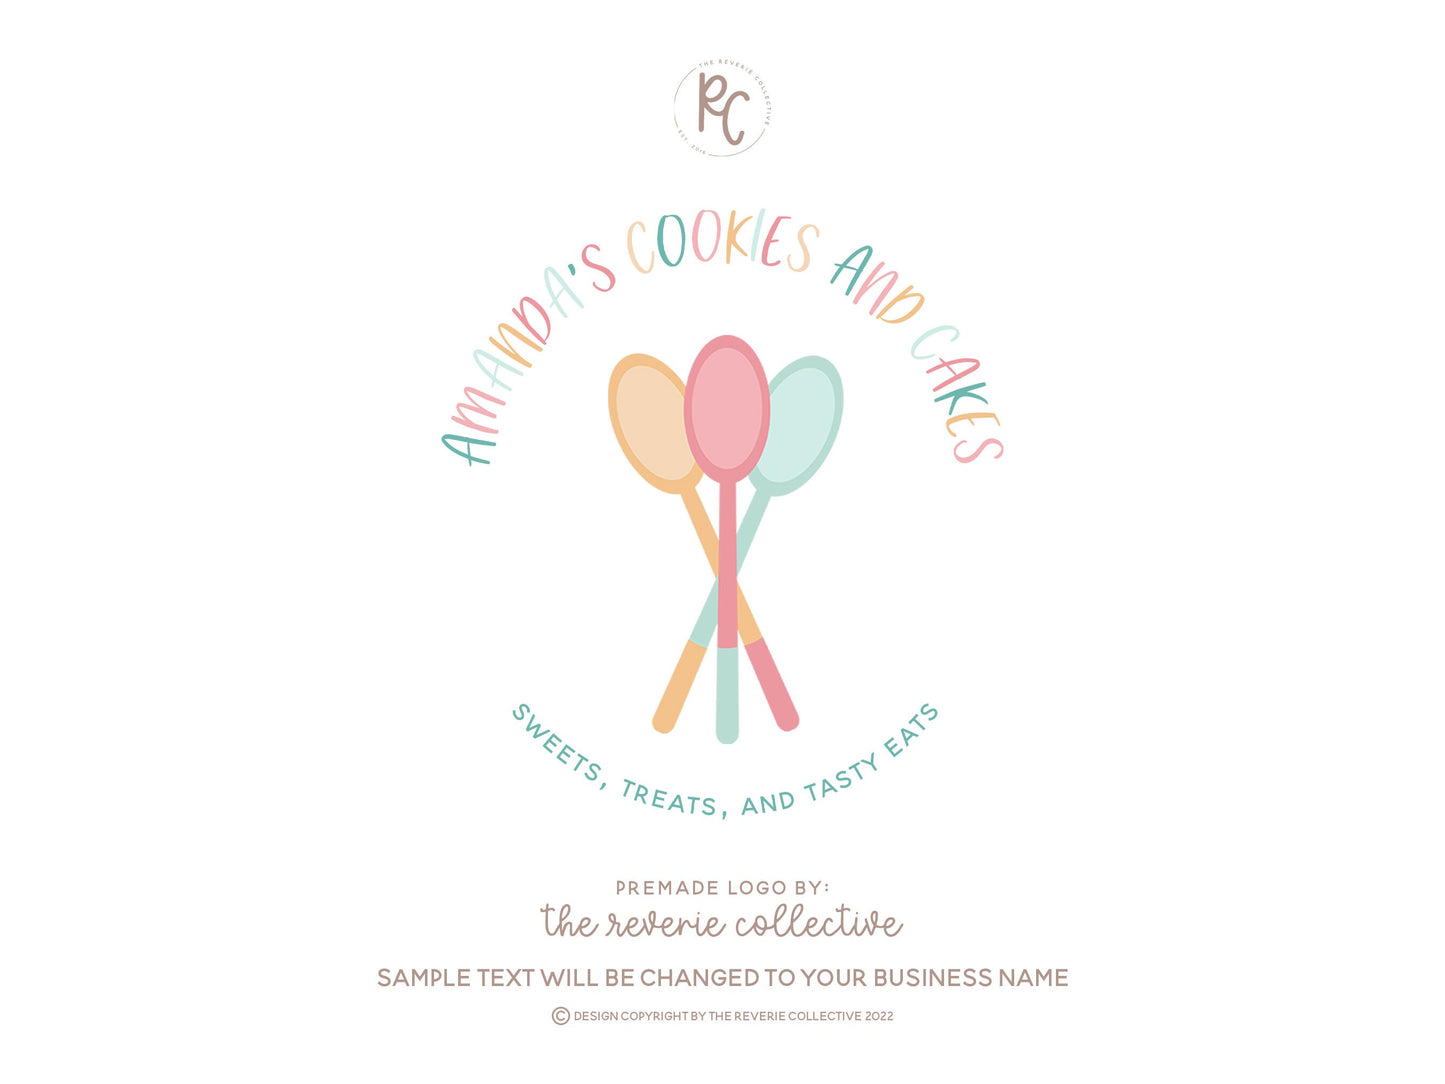 Amanda's Cookies and Cakes | Premade Logo Design | Mixing Spoons, Baking, Colorful